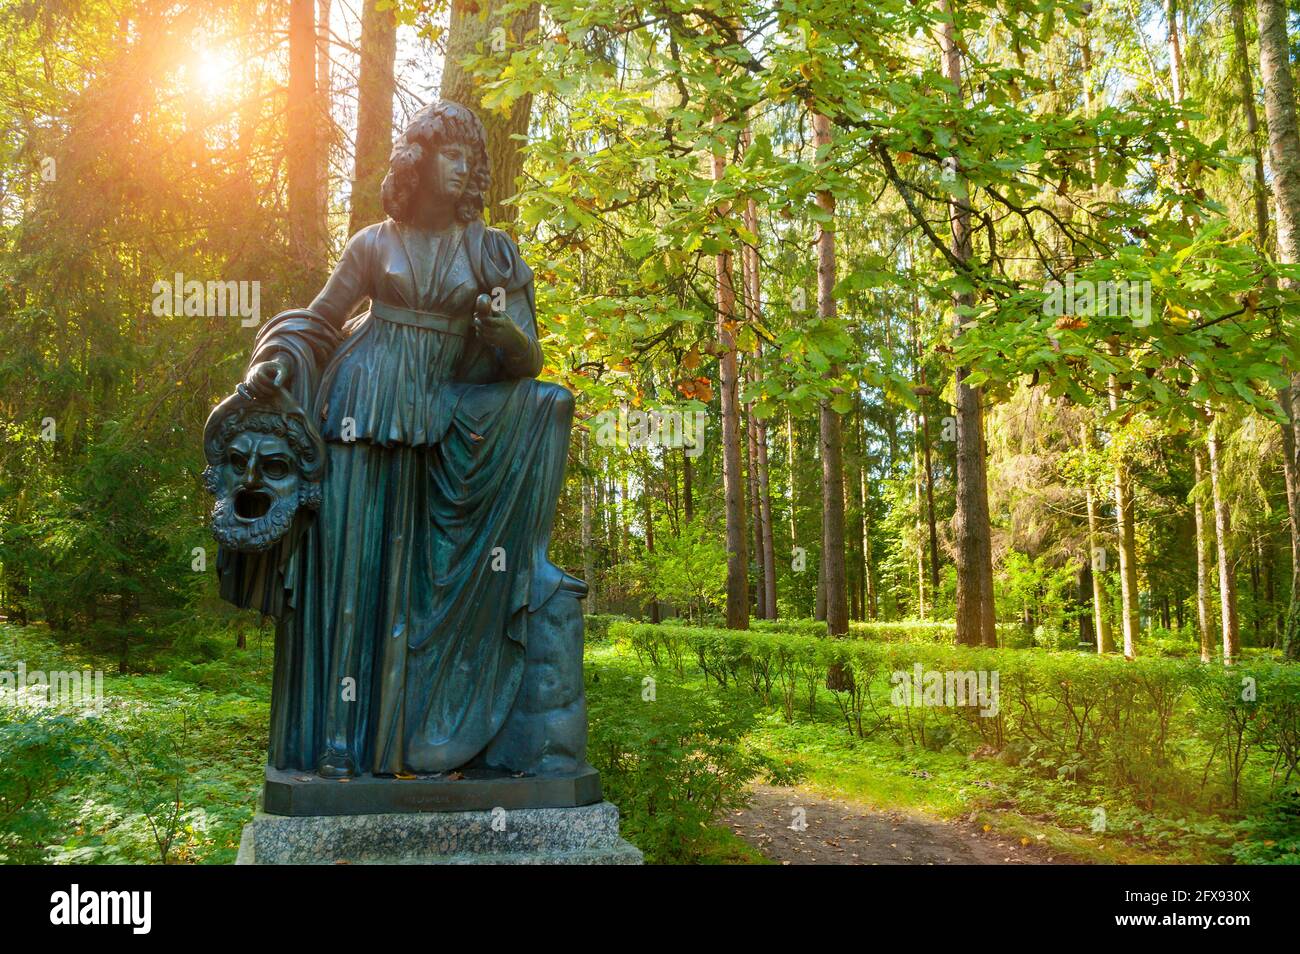 PAVLOVSK, ST PETERSBURG, RUSSIA - SEPTEMBER 21, 2017. Bronze sculpture of Melpomene - the muse of tragedy, with a tragic mask. Old Silvia park in Pavl Stock Photo